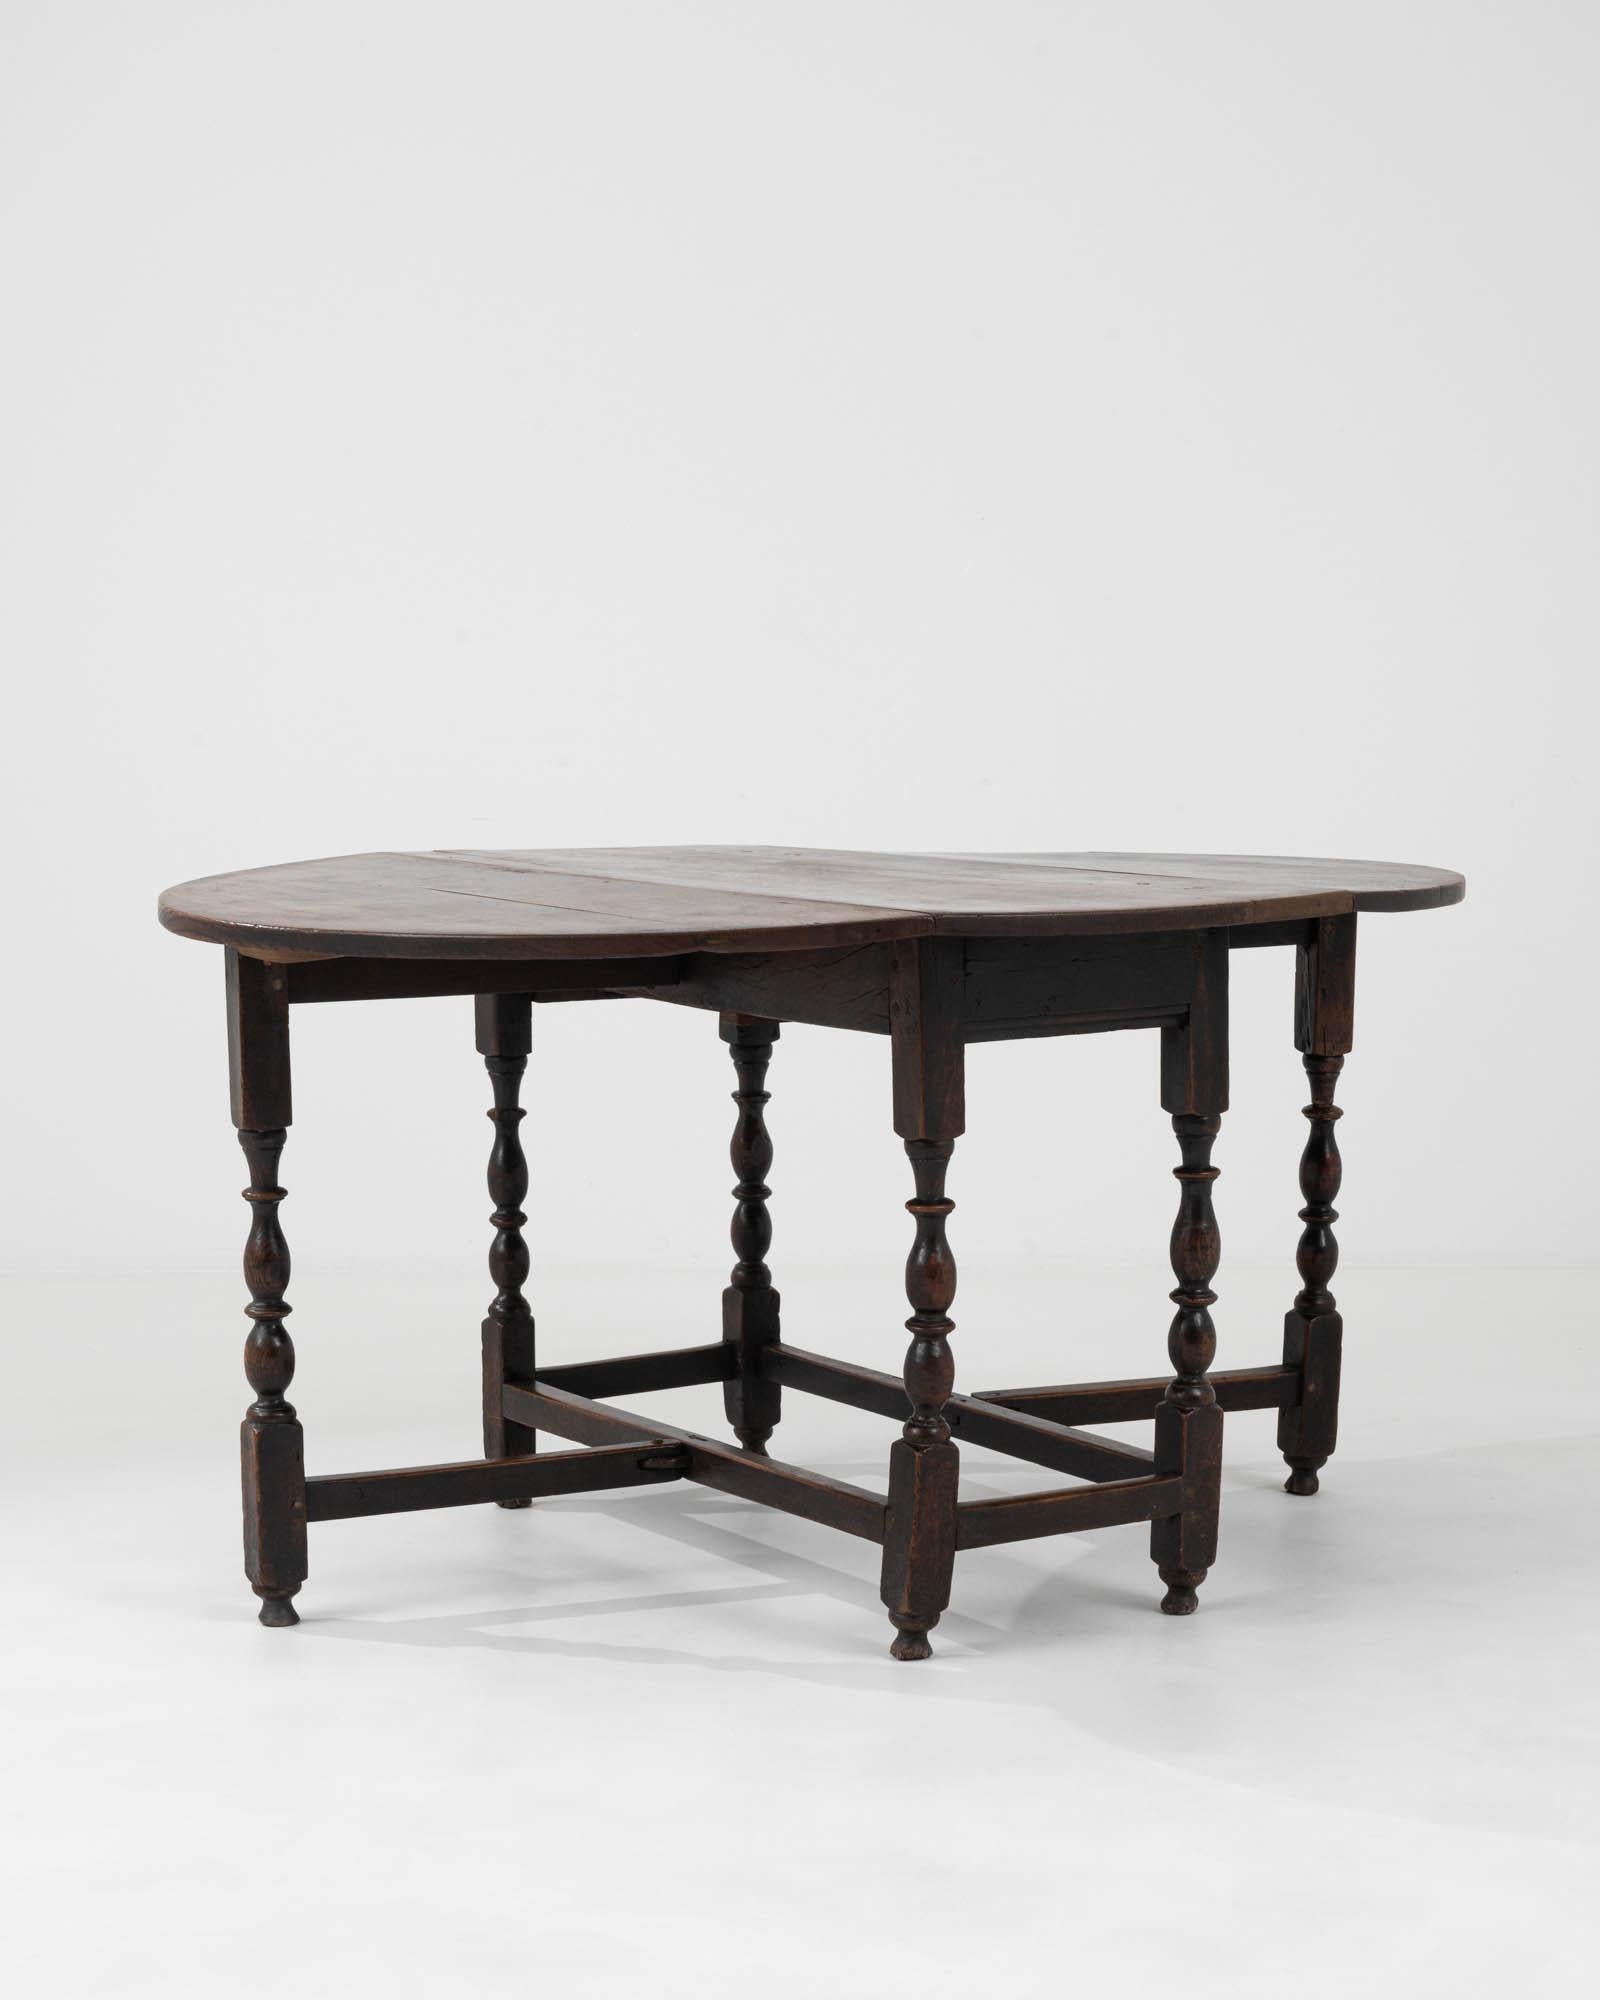 19th Century French Wooden Drop Leaf Table With Original Patina 3